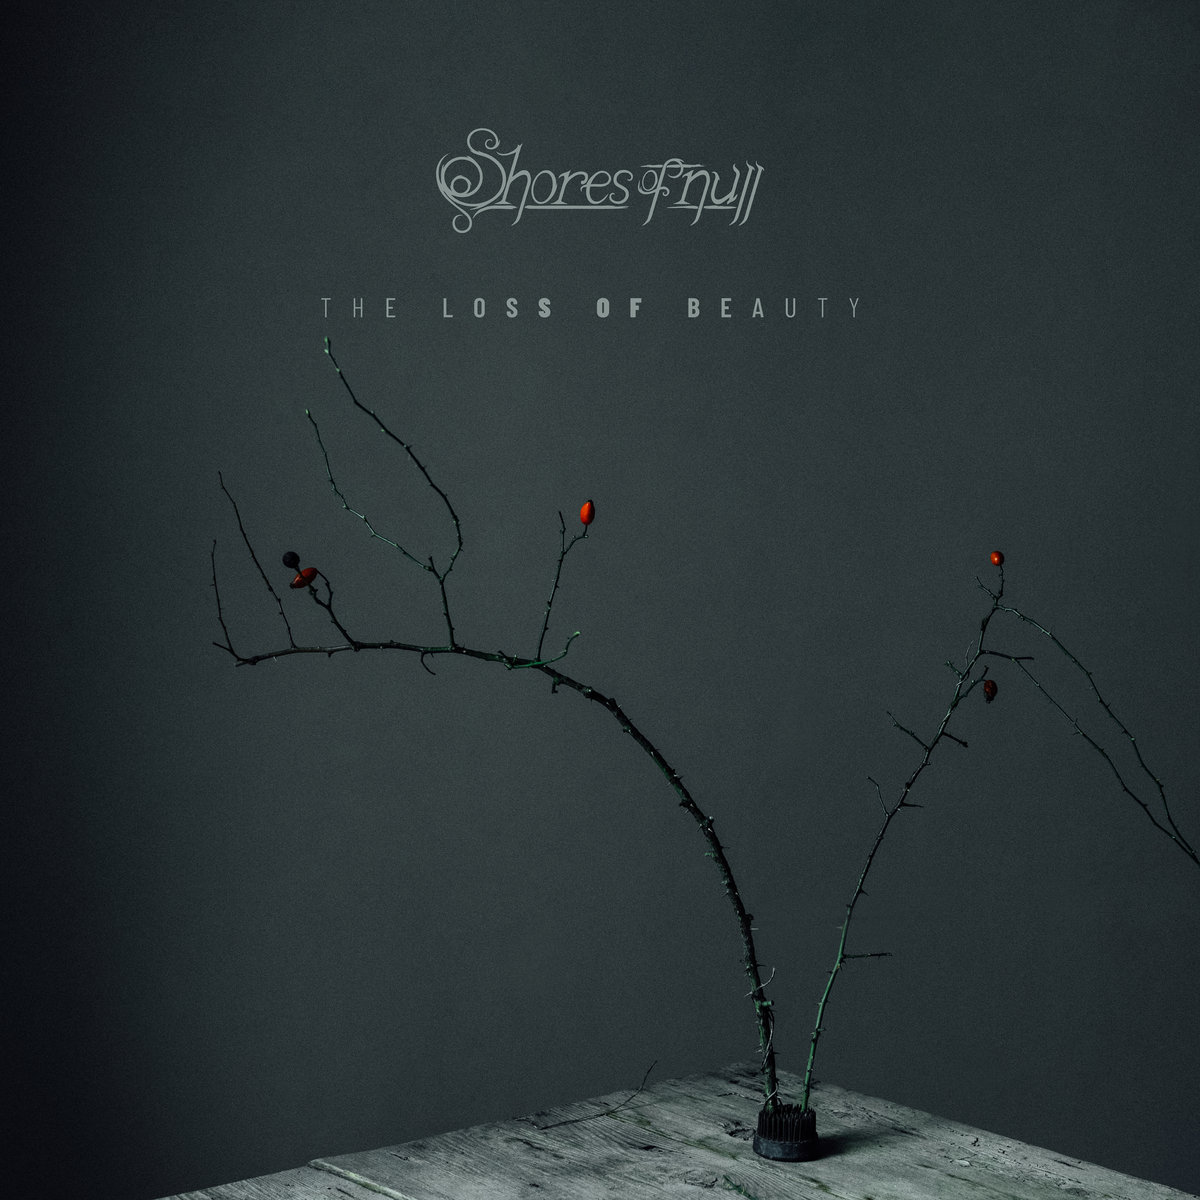 Cover art for The Loss of Beauty by Shores of Null. Barren tree on a table, bending.